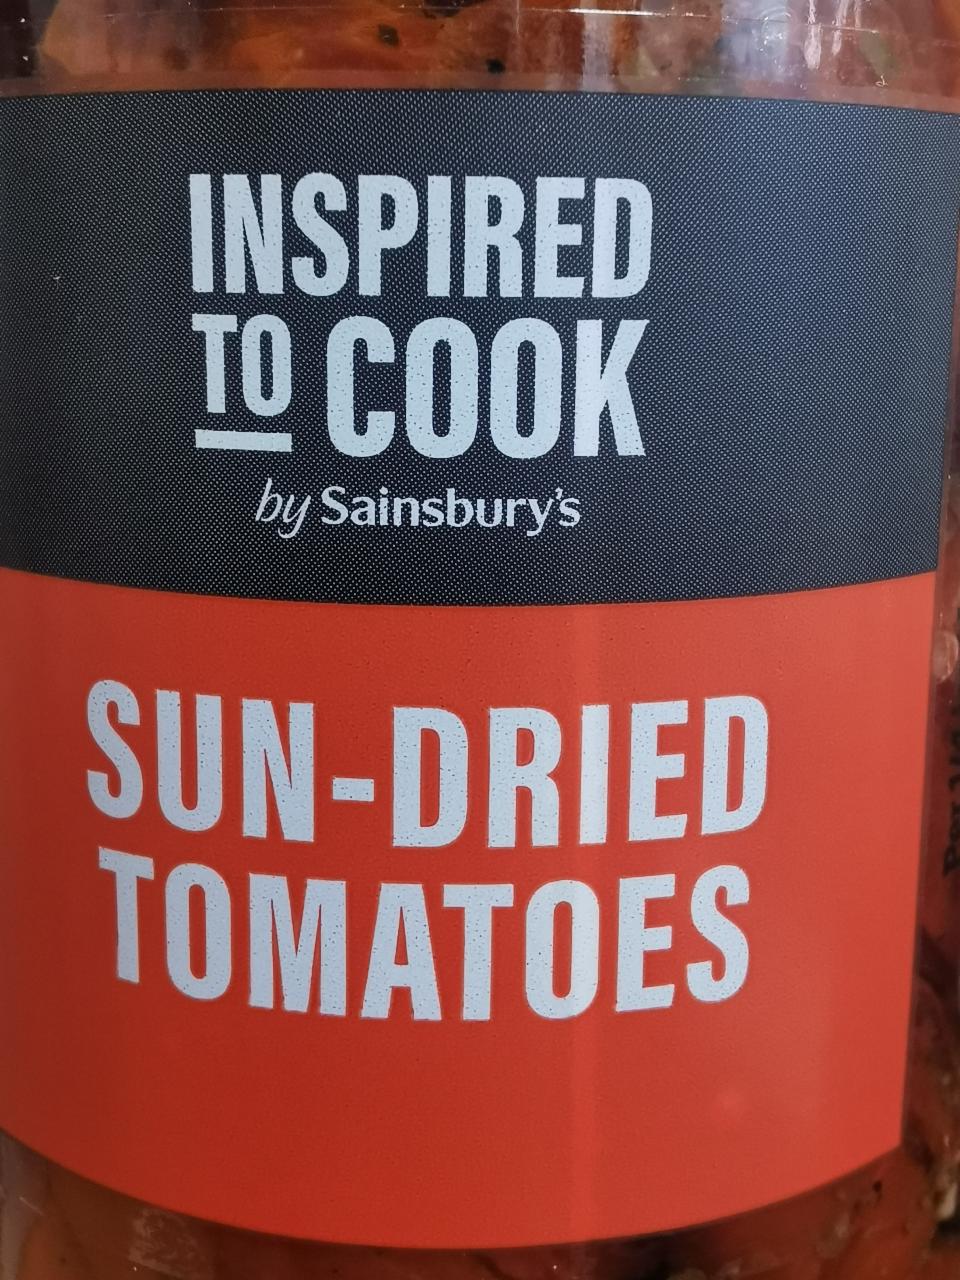 Fotografie - Inspired to Cook Sun-Dried Tomatoes by Sainsbury's